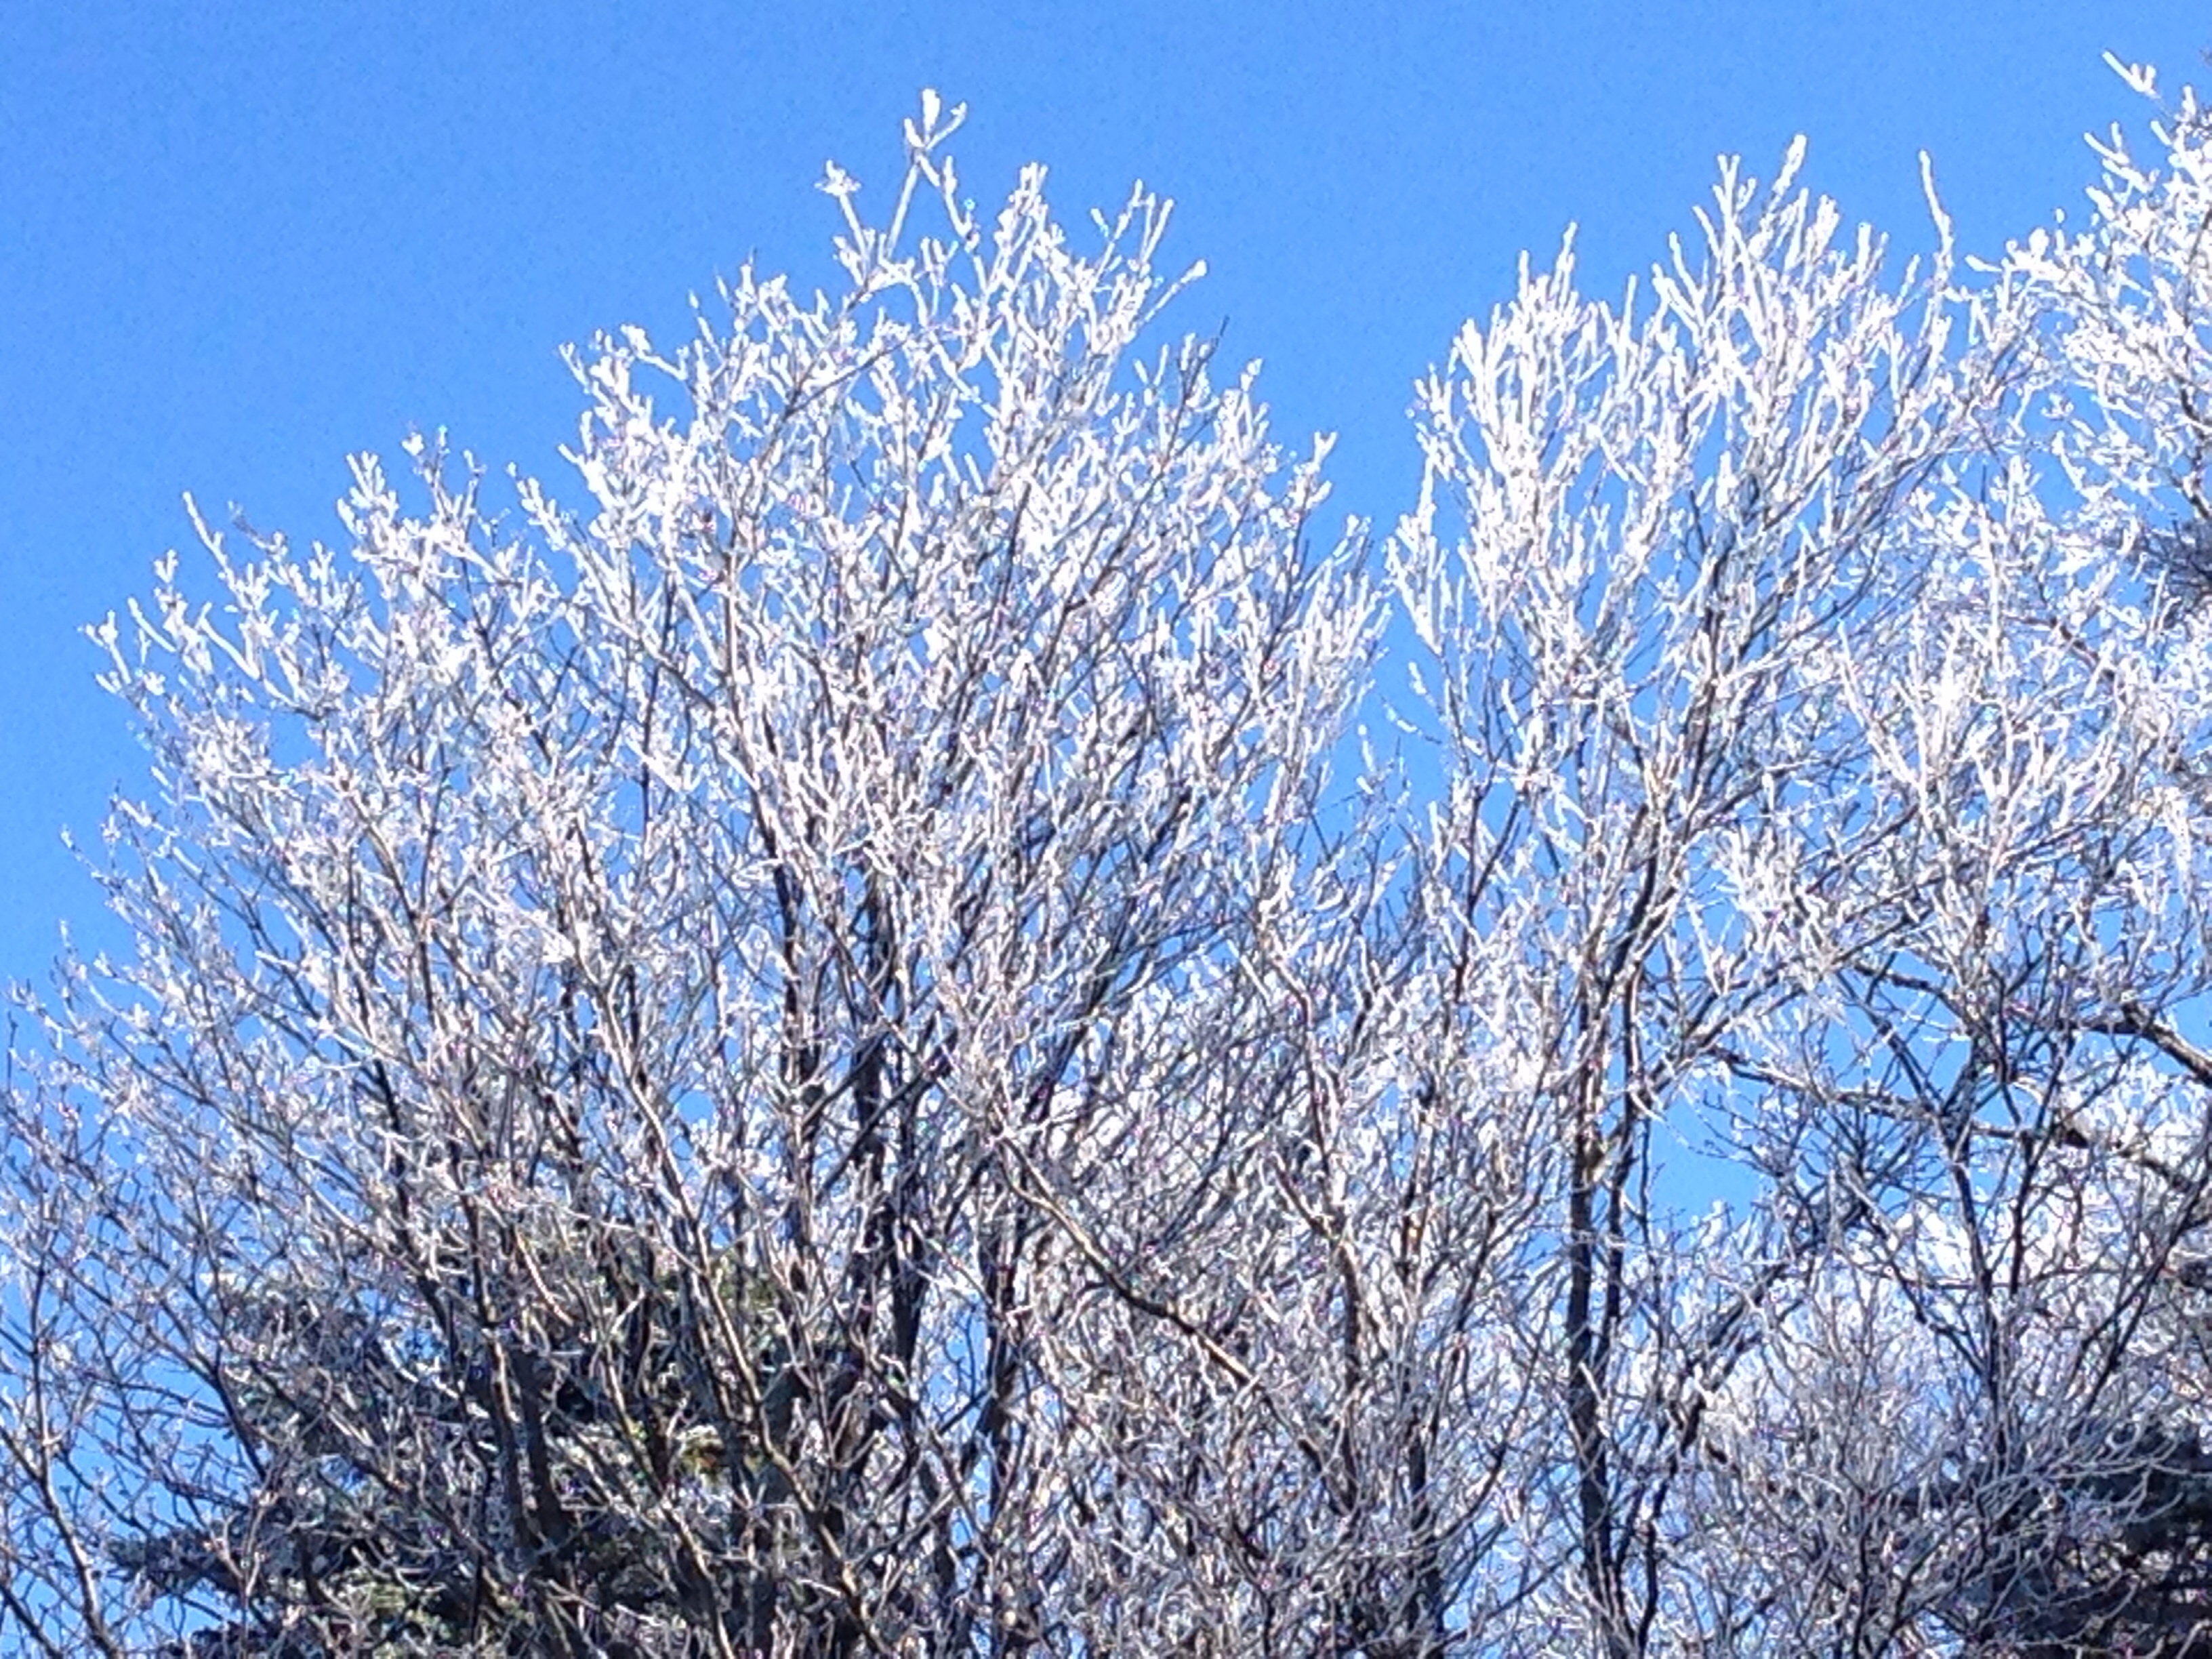 File:The beginning of winter, ice covered trees on top of a mountain ...